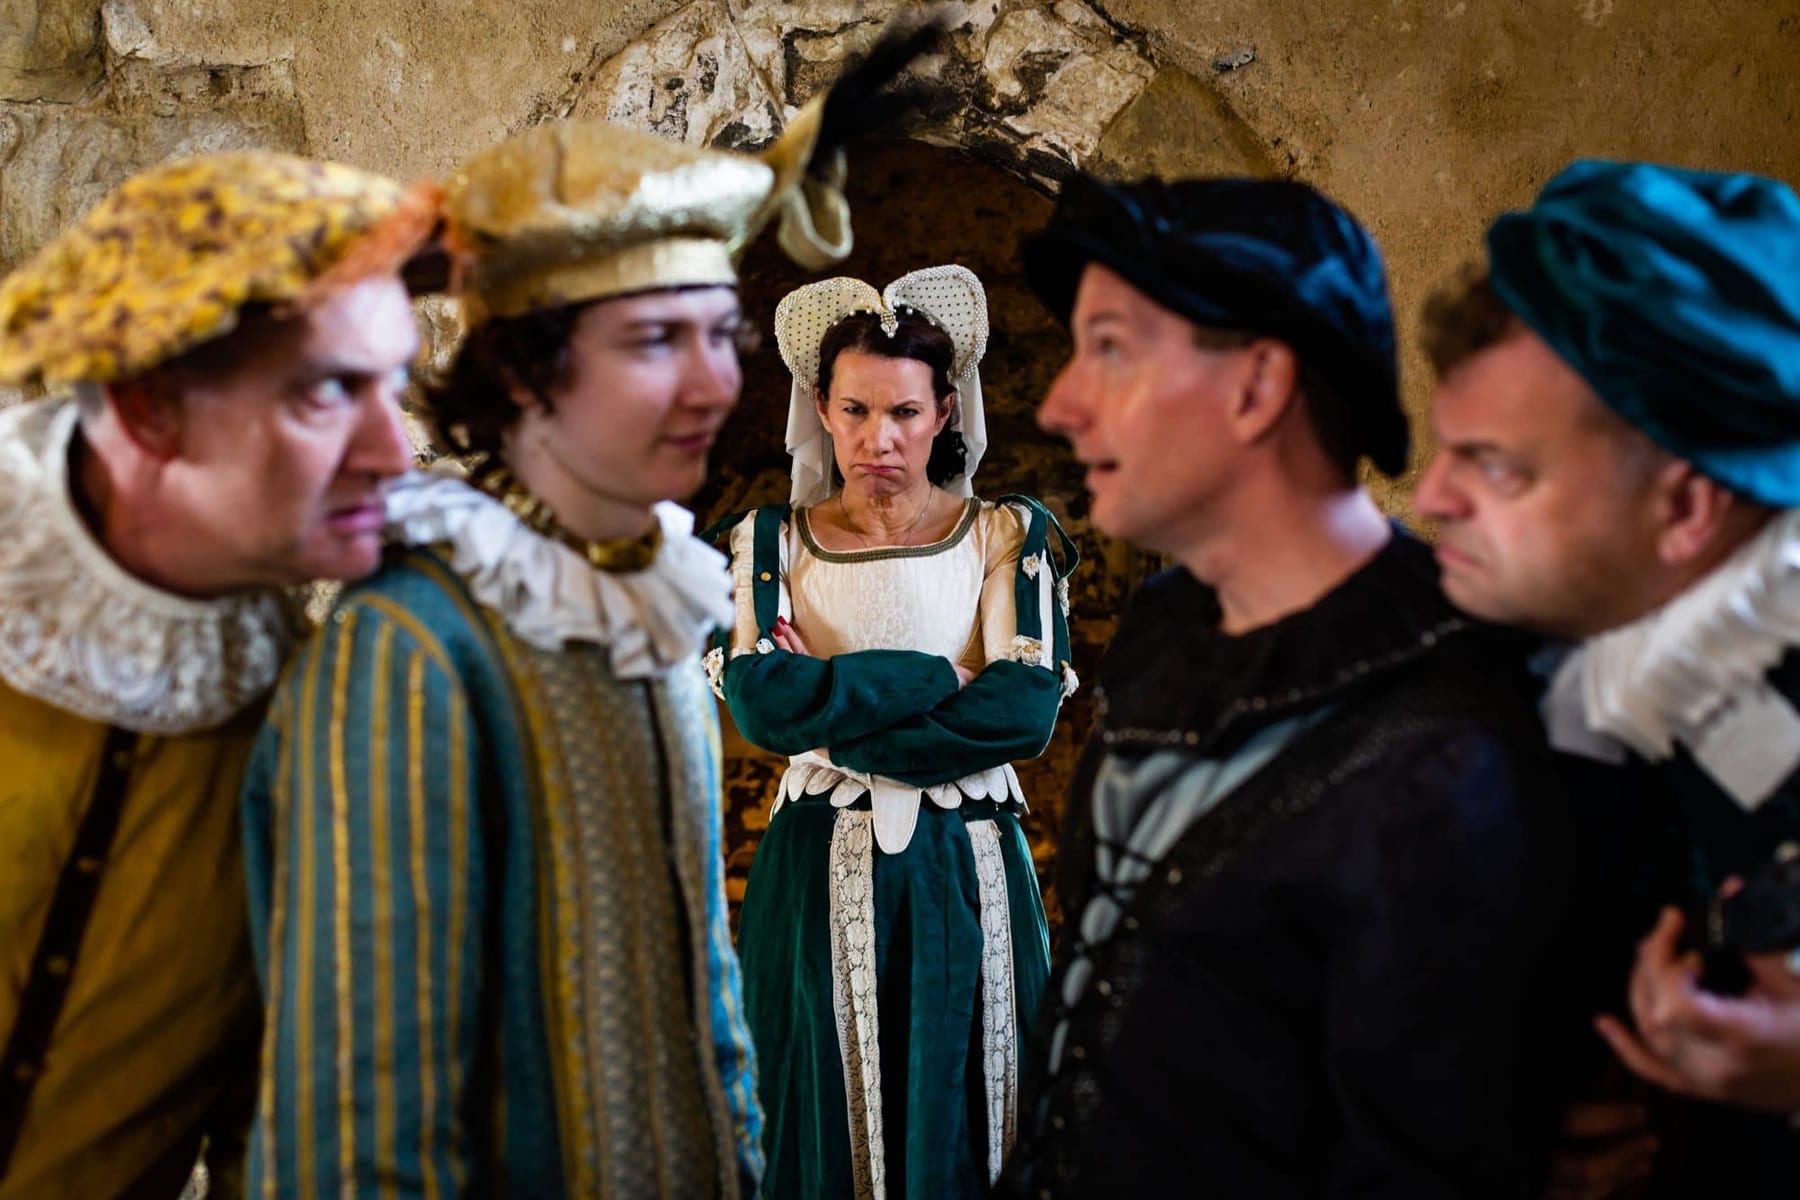 Pranksters Theatre Company perform Taming Of The Shrew